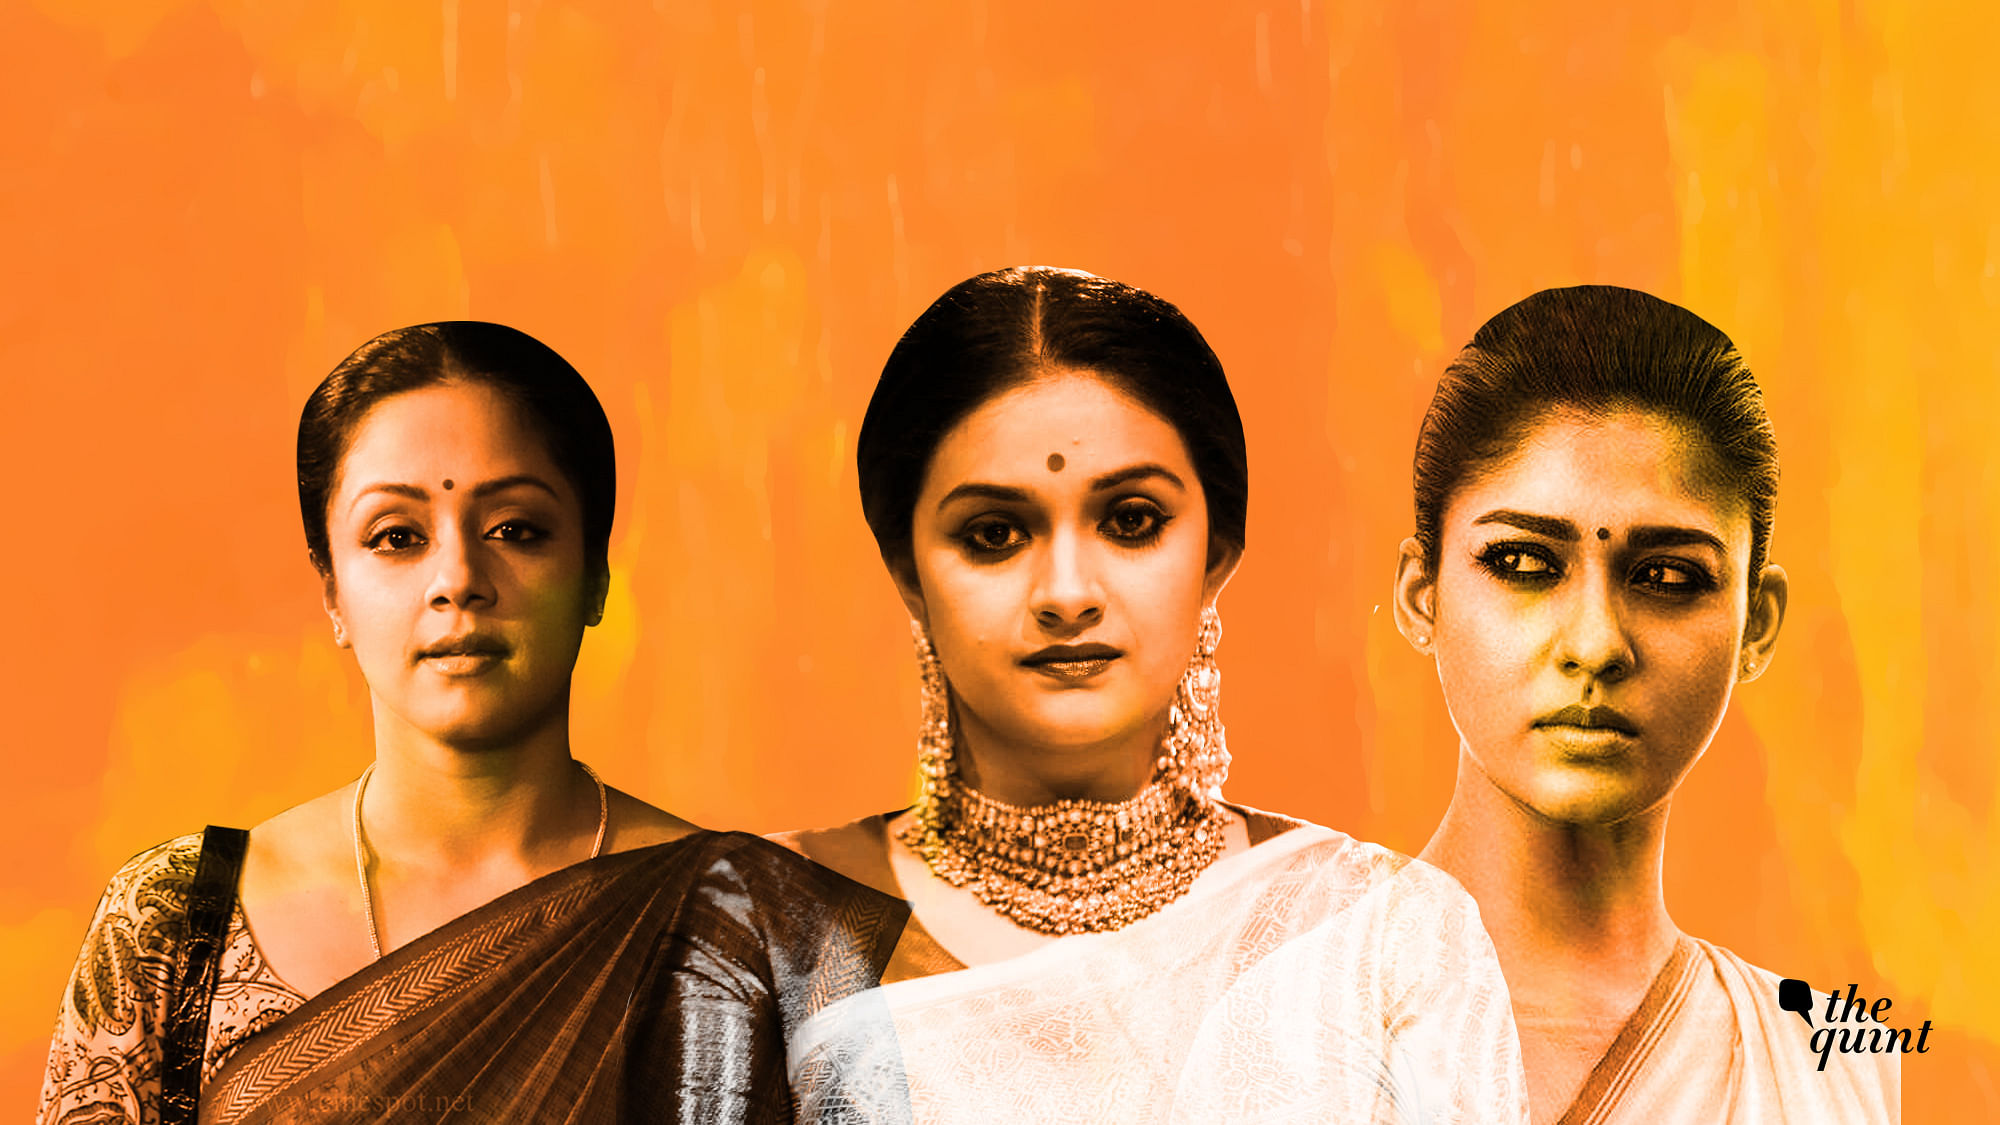 There’s been a steady rise in women-centric films over the last years, with Nayanthara and Jyothika leading the way.